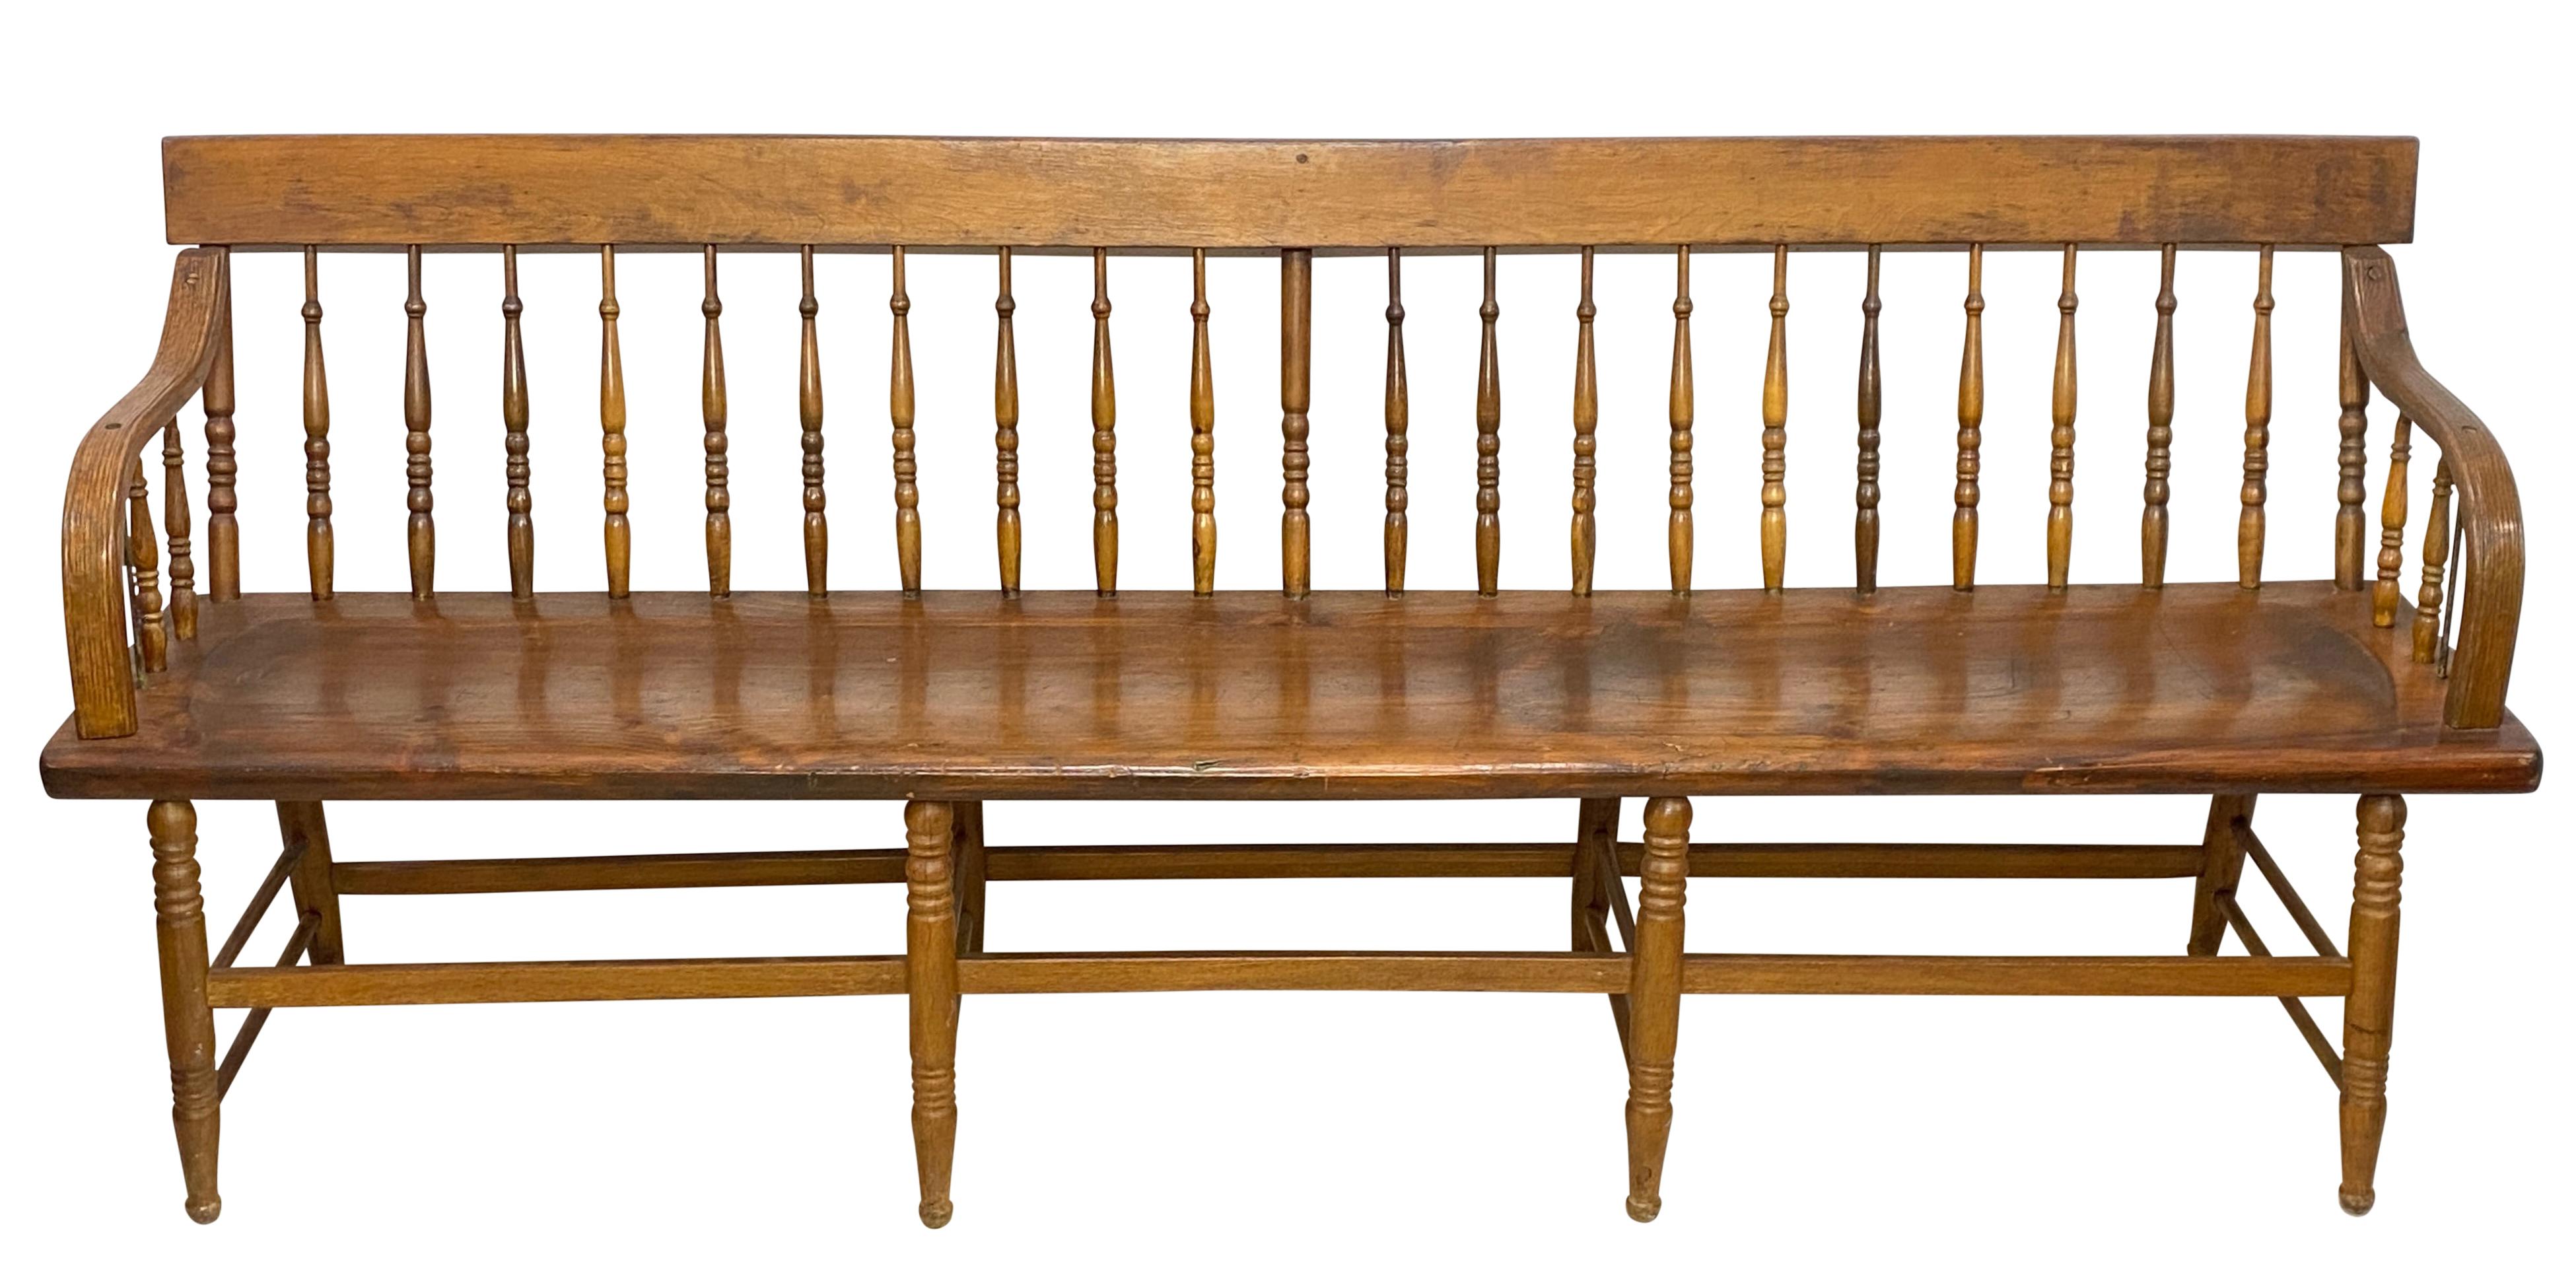 An unusually long Windsor style spindle back Deacon's Bench or farm style bench. Pine with plank seat and oak arms. Originally painted green, this bench was stripped and refinished sometime in the second half the 20th century. 
Solid and sturdy,